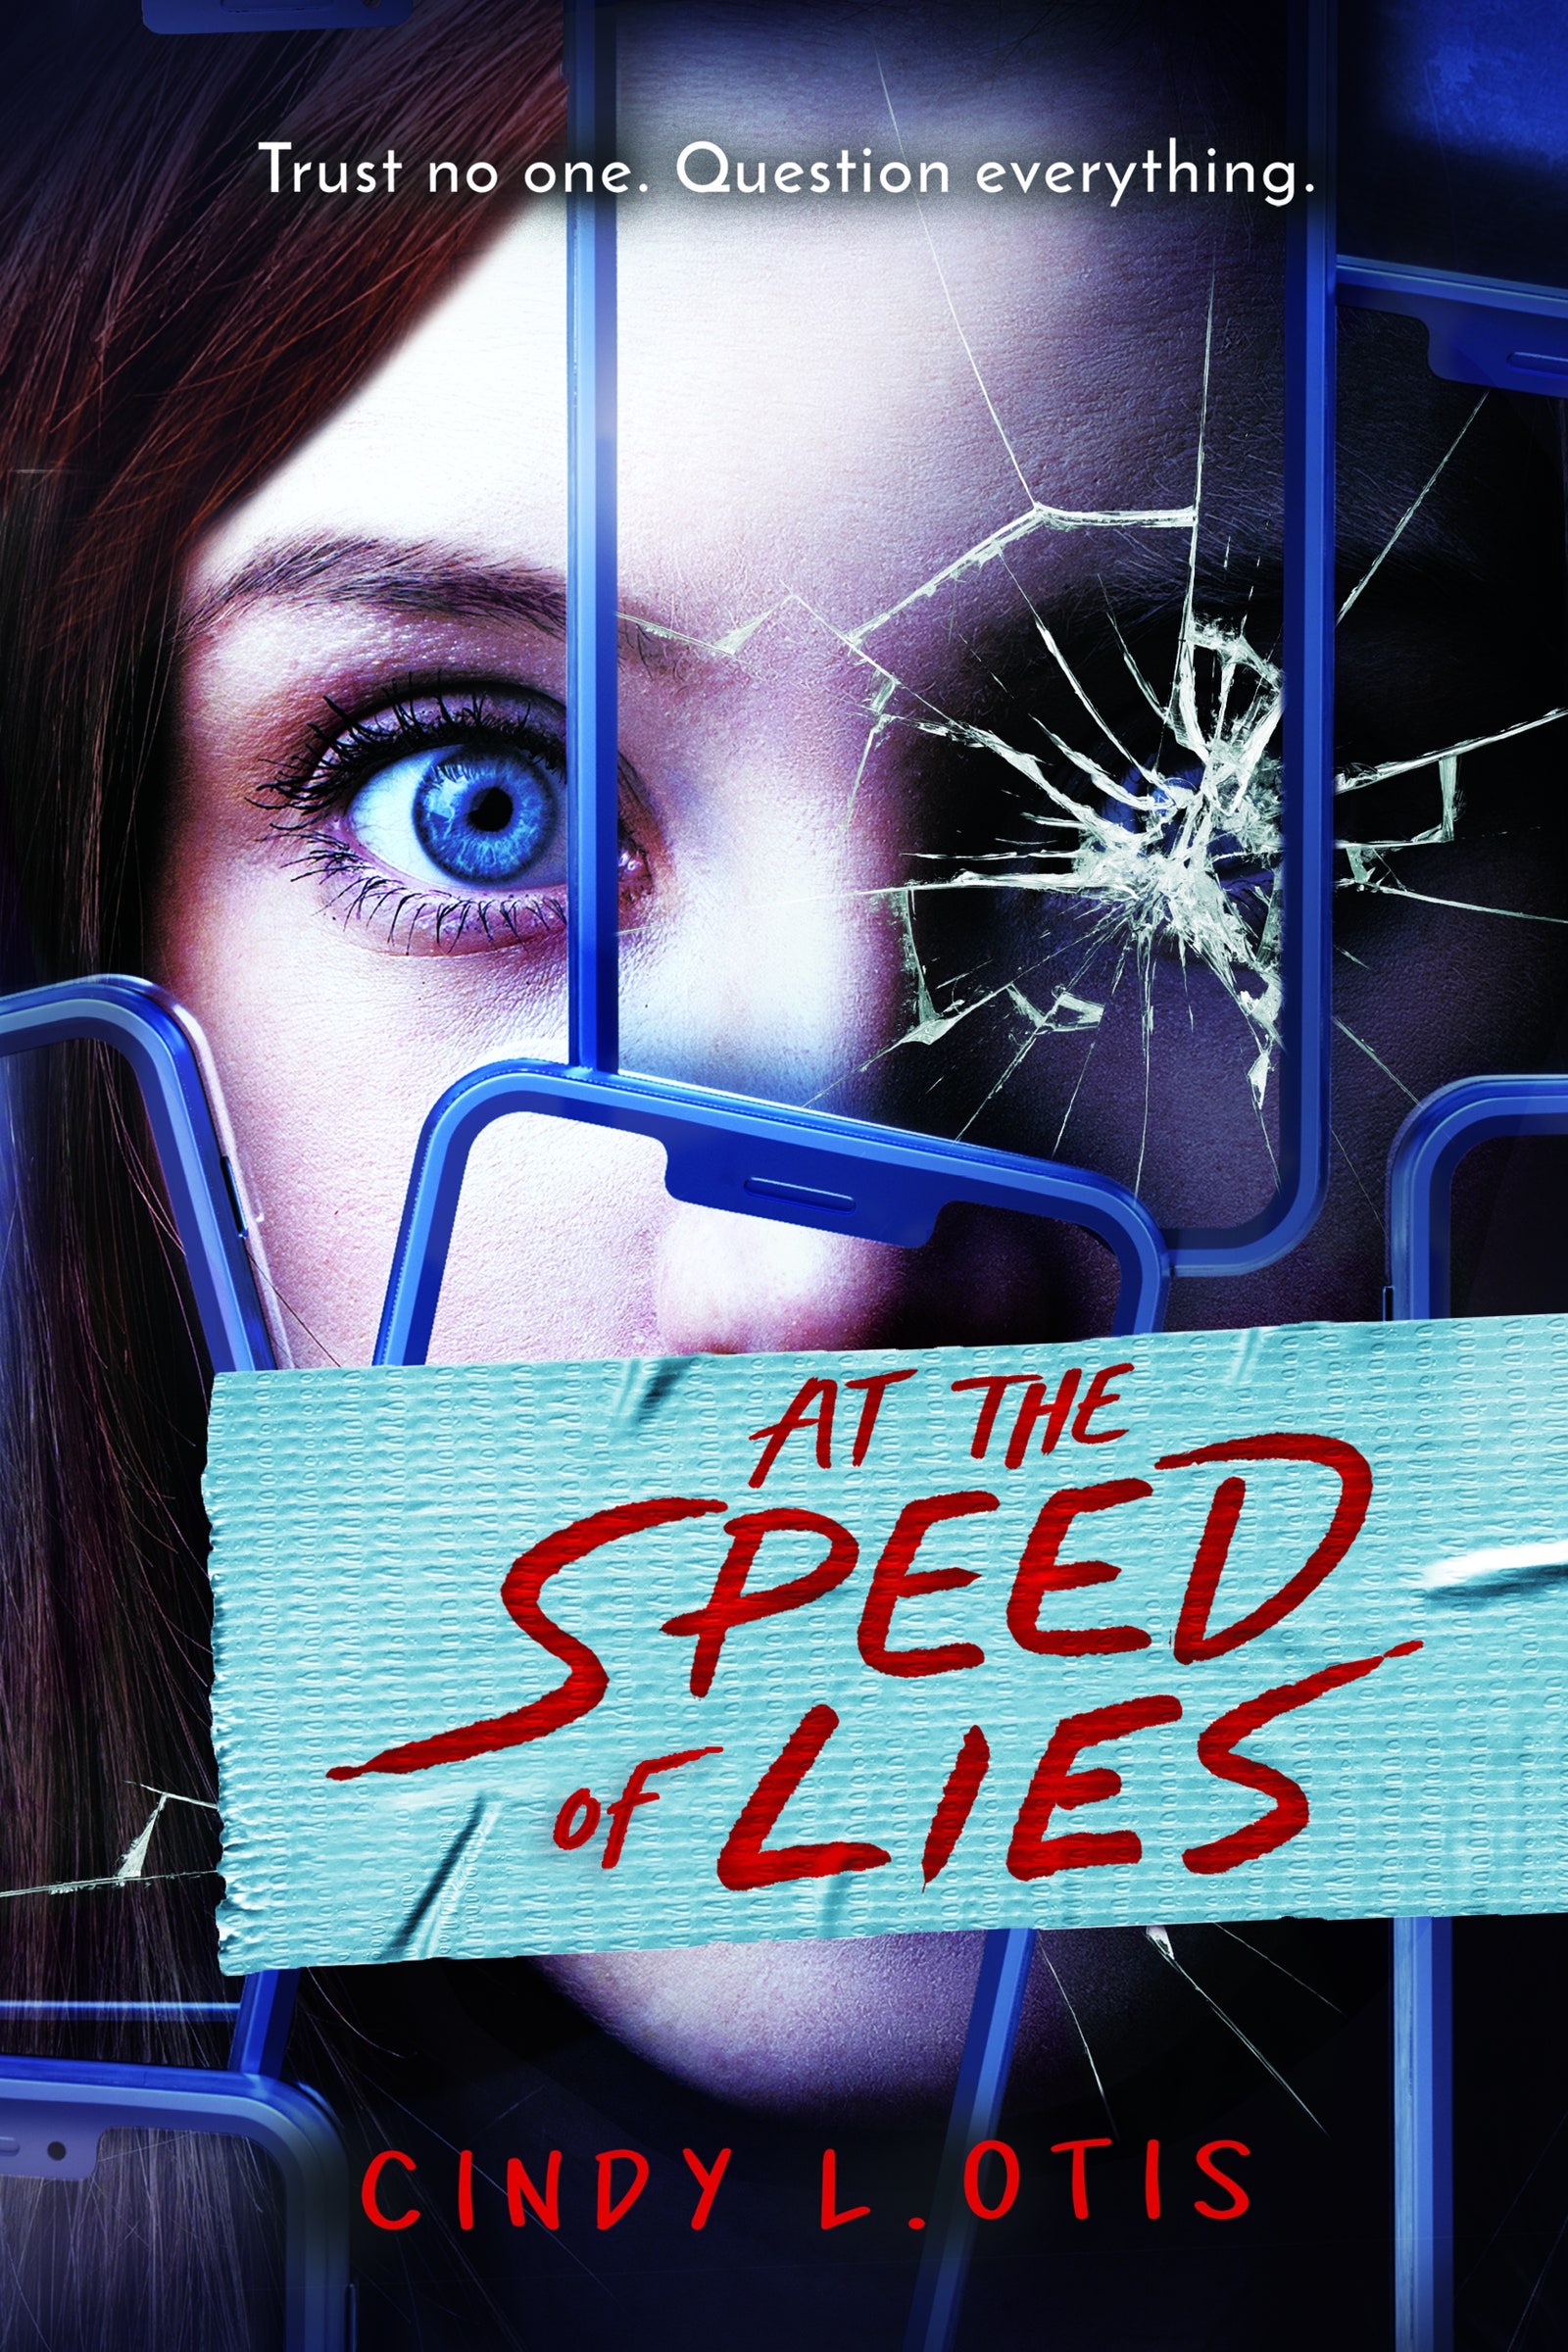 Cover of At the Speed ​​of Lies by Cindy Otis, showing a young person with tape over their mouth and broken phone screens.